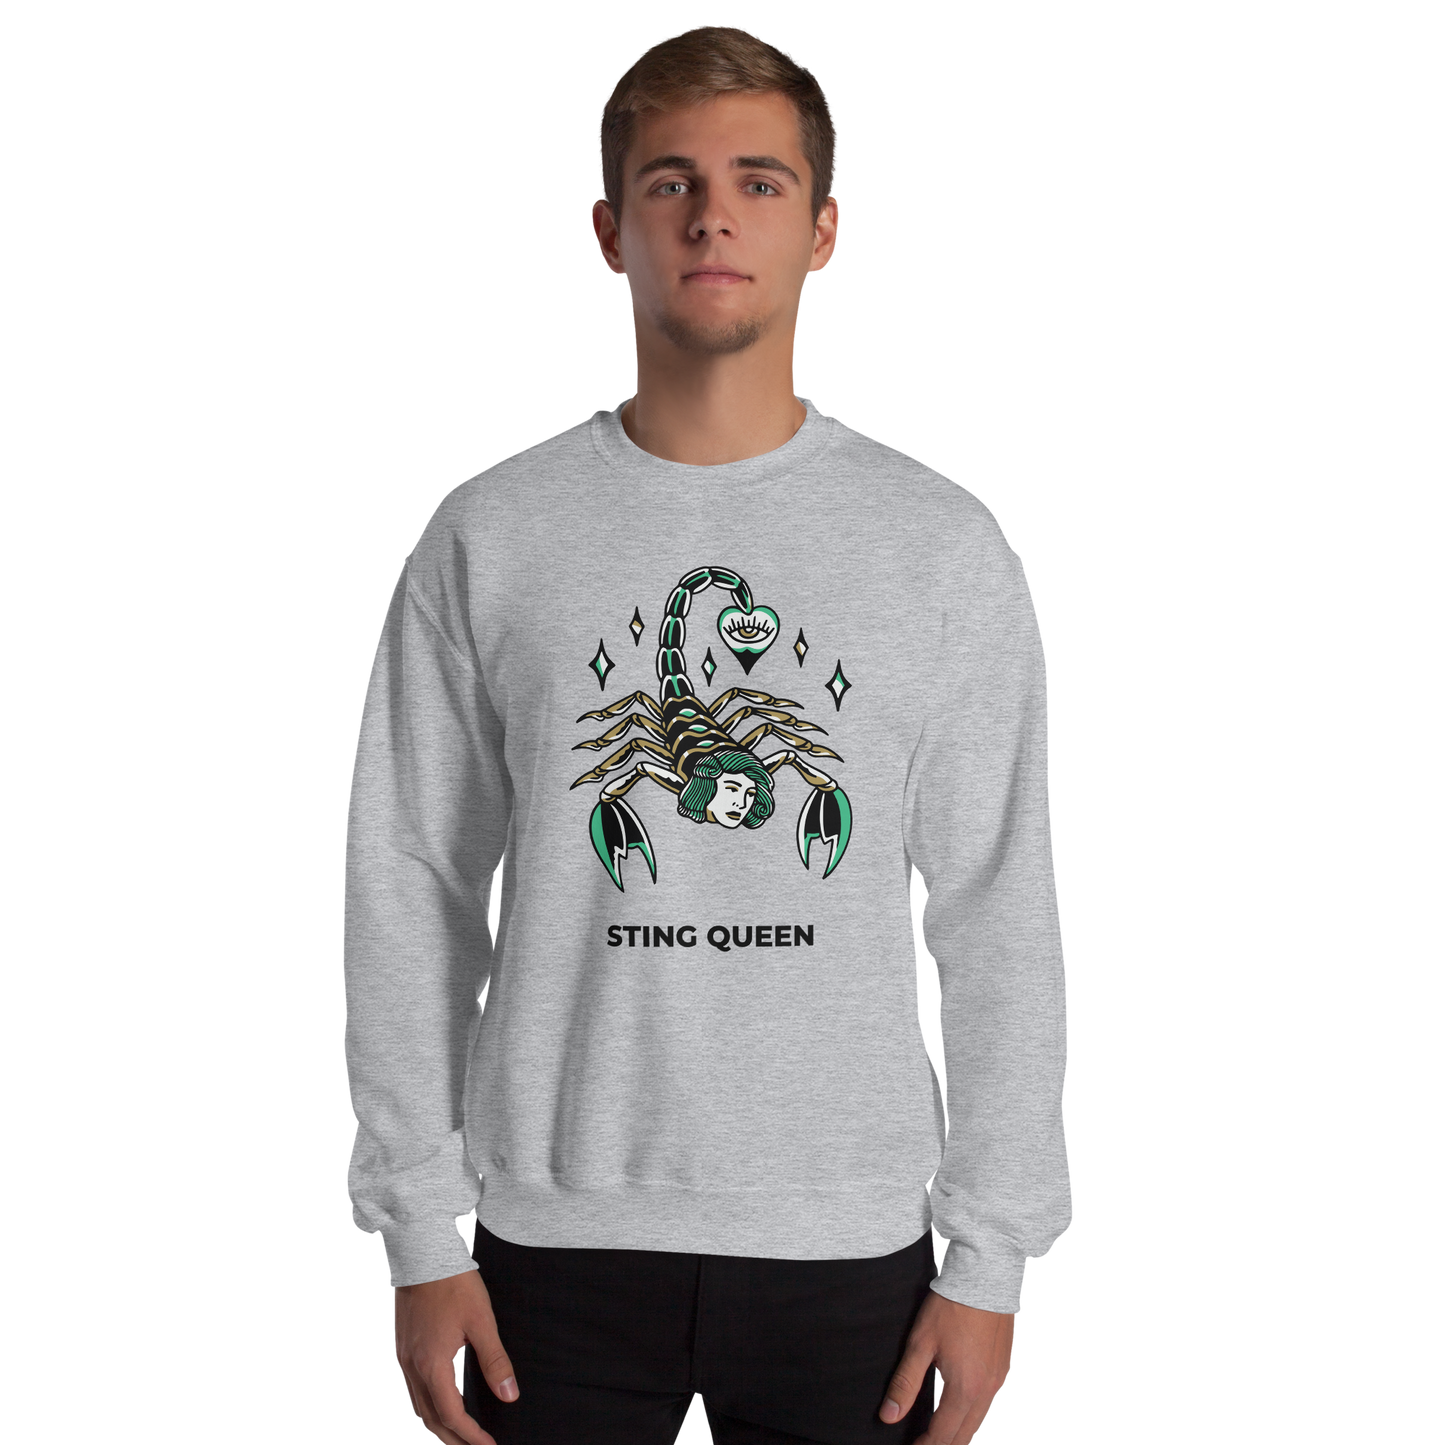 Man wearing a Sport Grey Scorpion Sweatshirt featuring the Sting Queen graphic on the chest - Cool Graphic Scorpion Sweatshirts - Boozy Fox